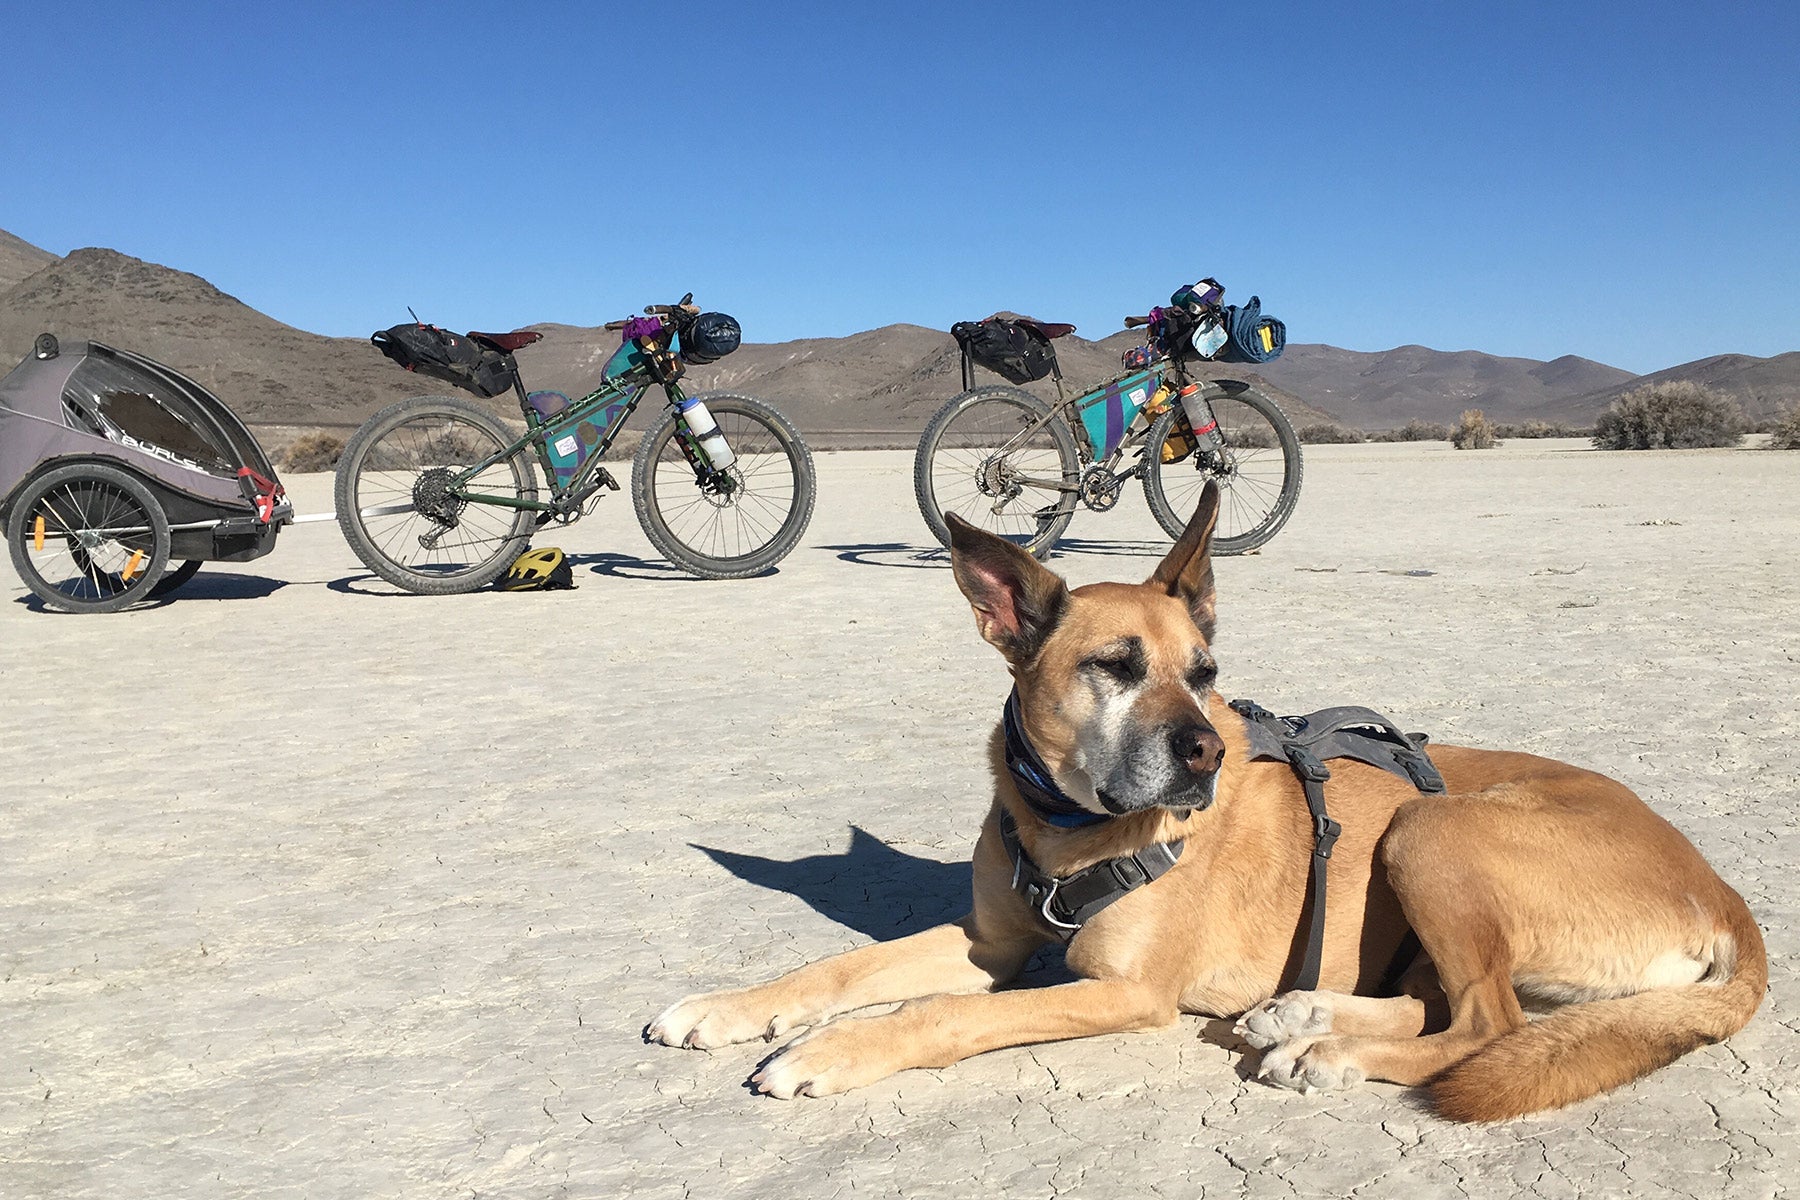 Dog star taking a break on a desert playa with mountain bikes in the background